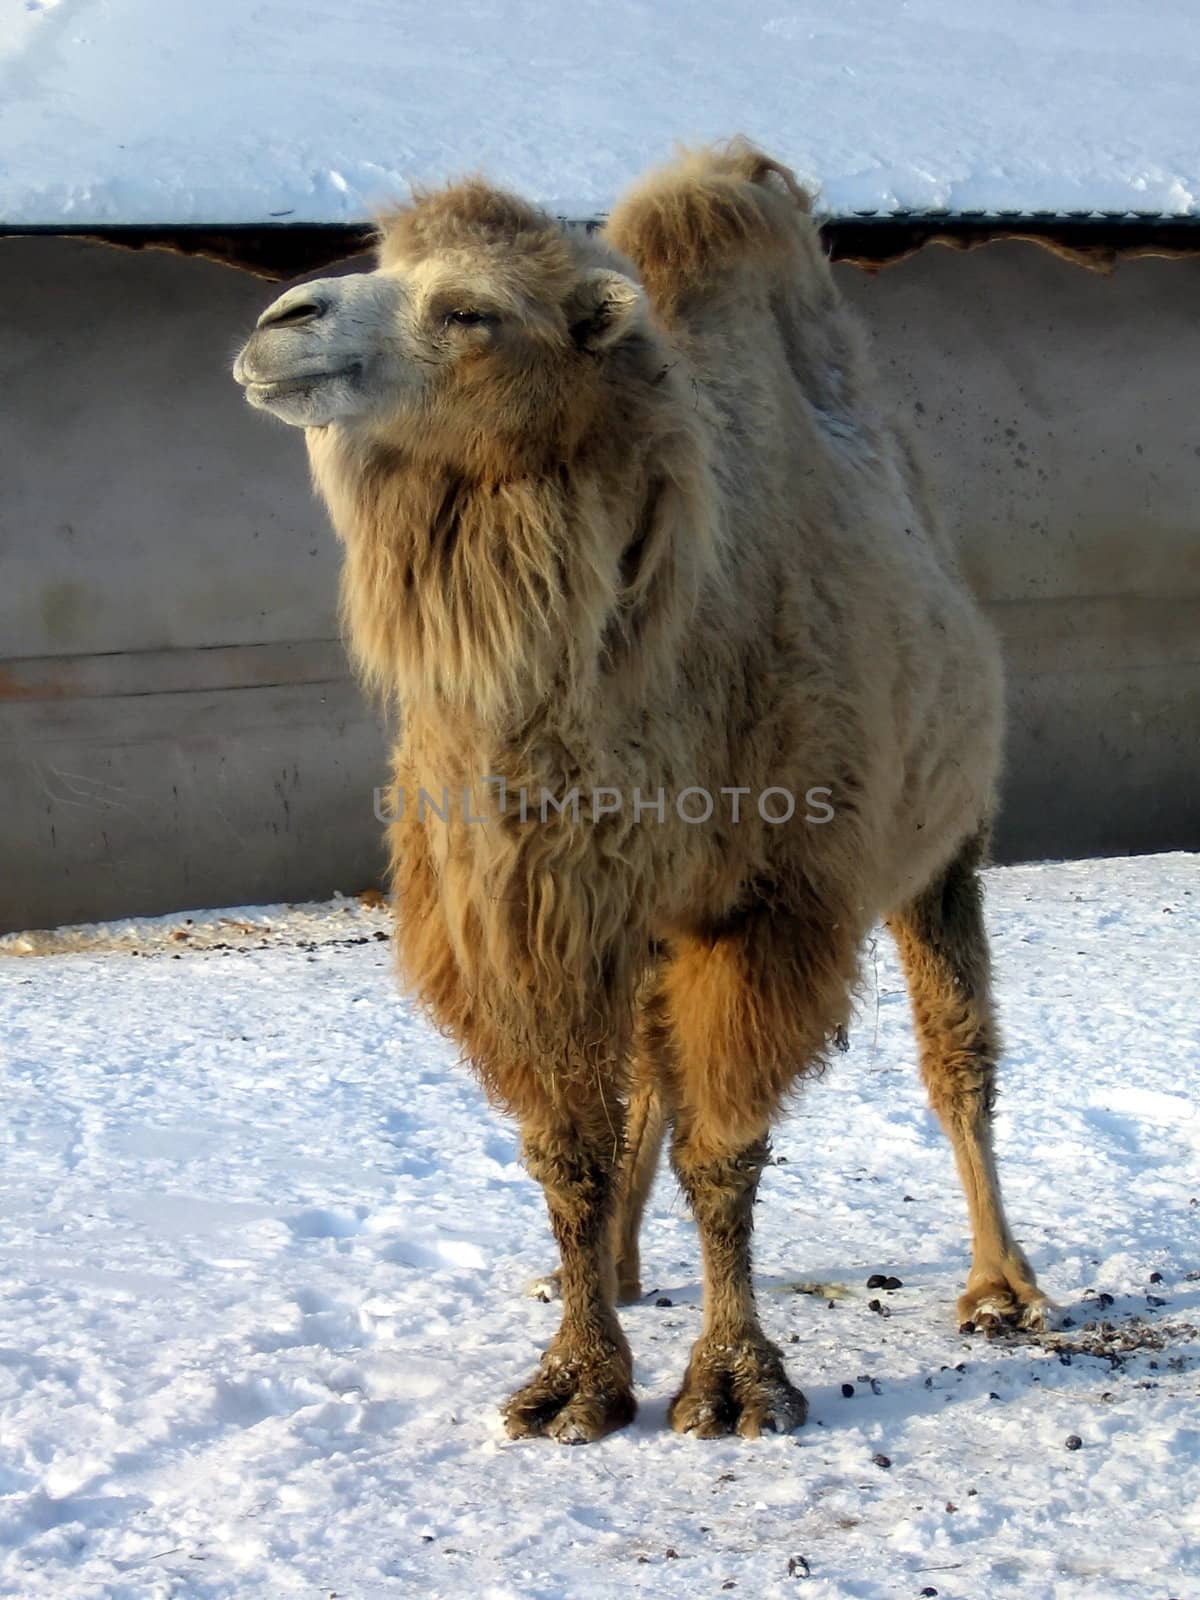 Camel on snow by tomatto